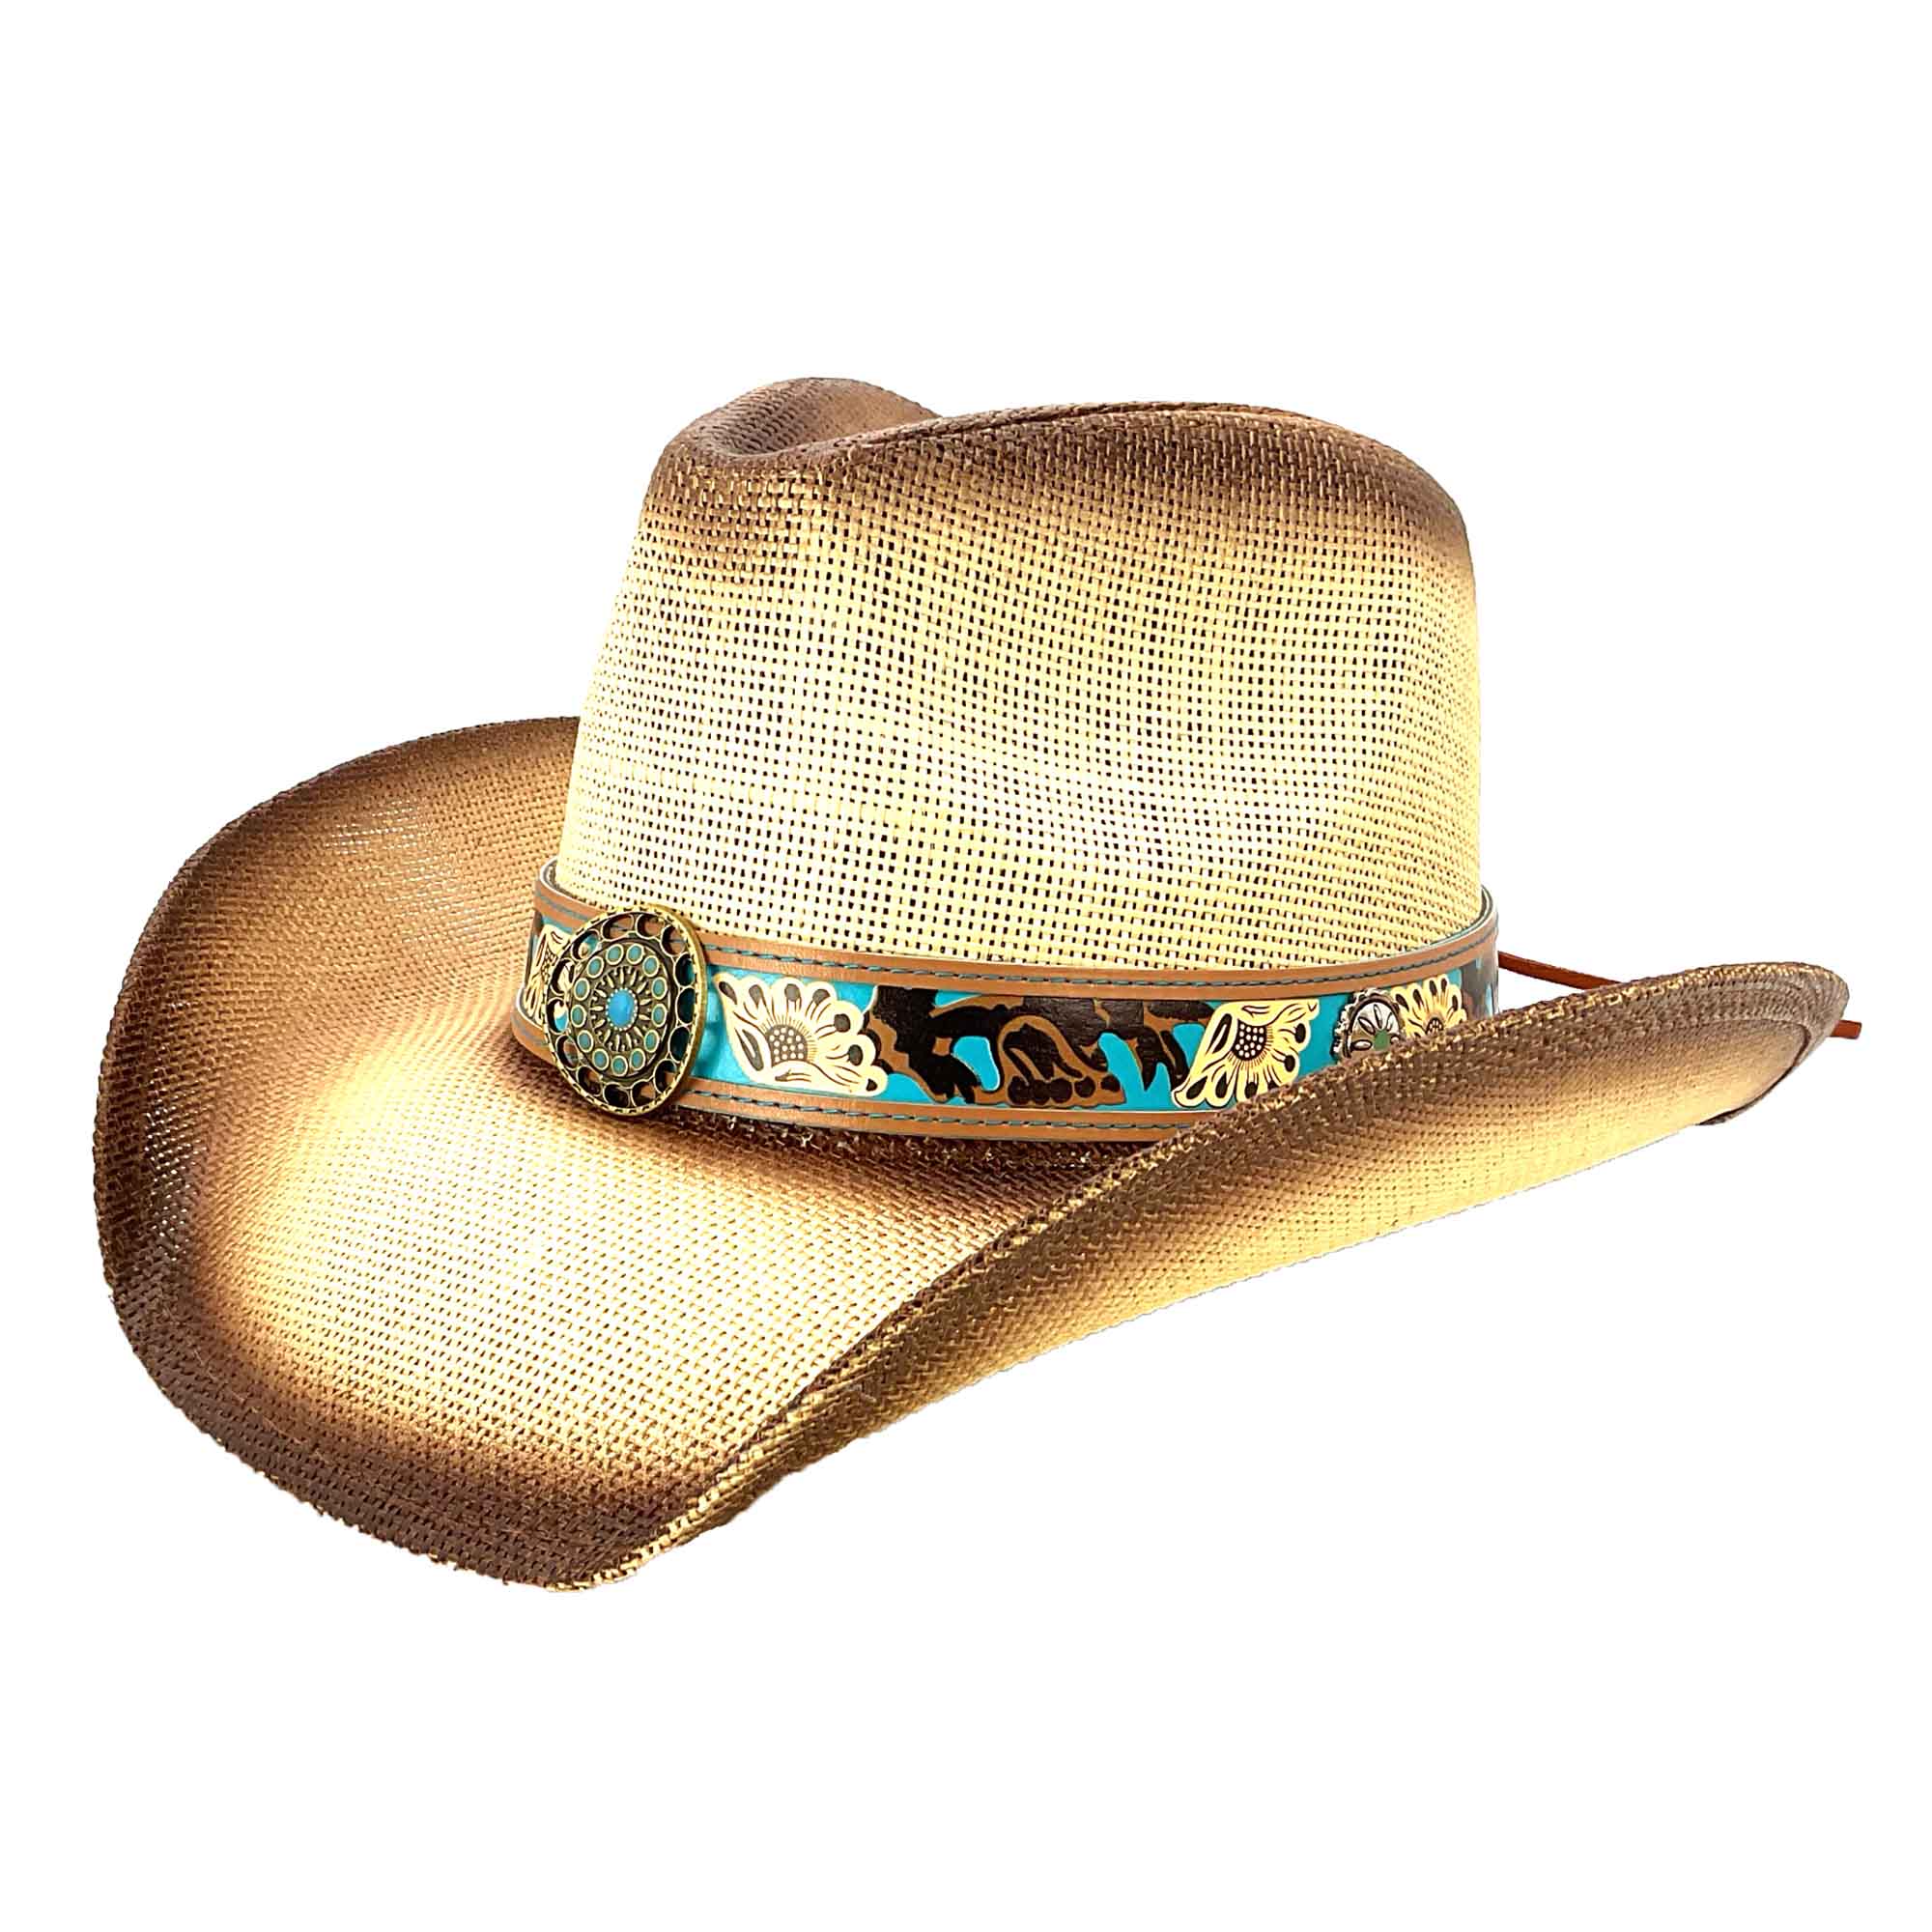 Straw Cowboy Hat with Turquoise Band and Concho - Milani Hats Cowboy Hat Milani Hats ST-118NAT Natural M/L 